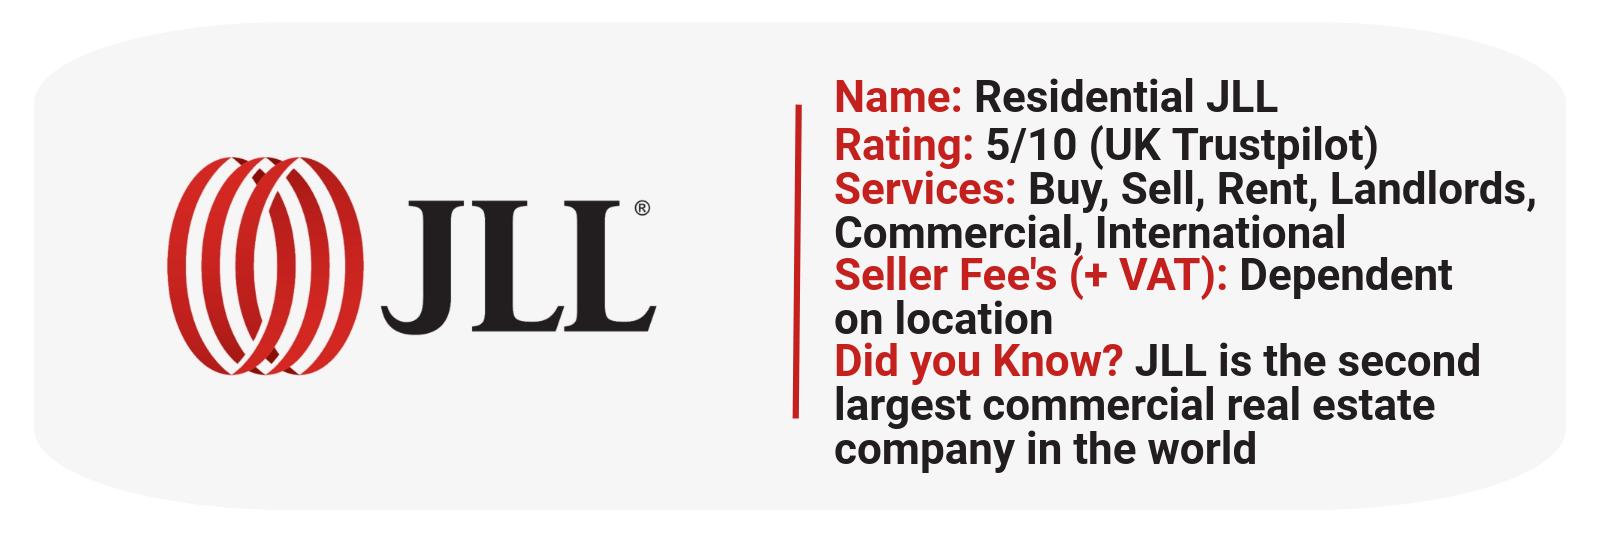 JLL statistics featuring rating, services & seller fee's